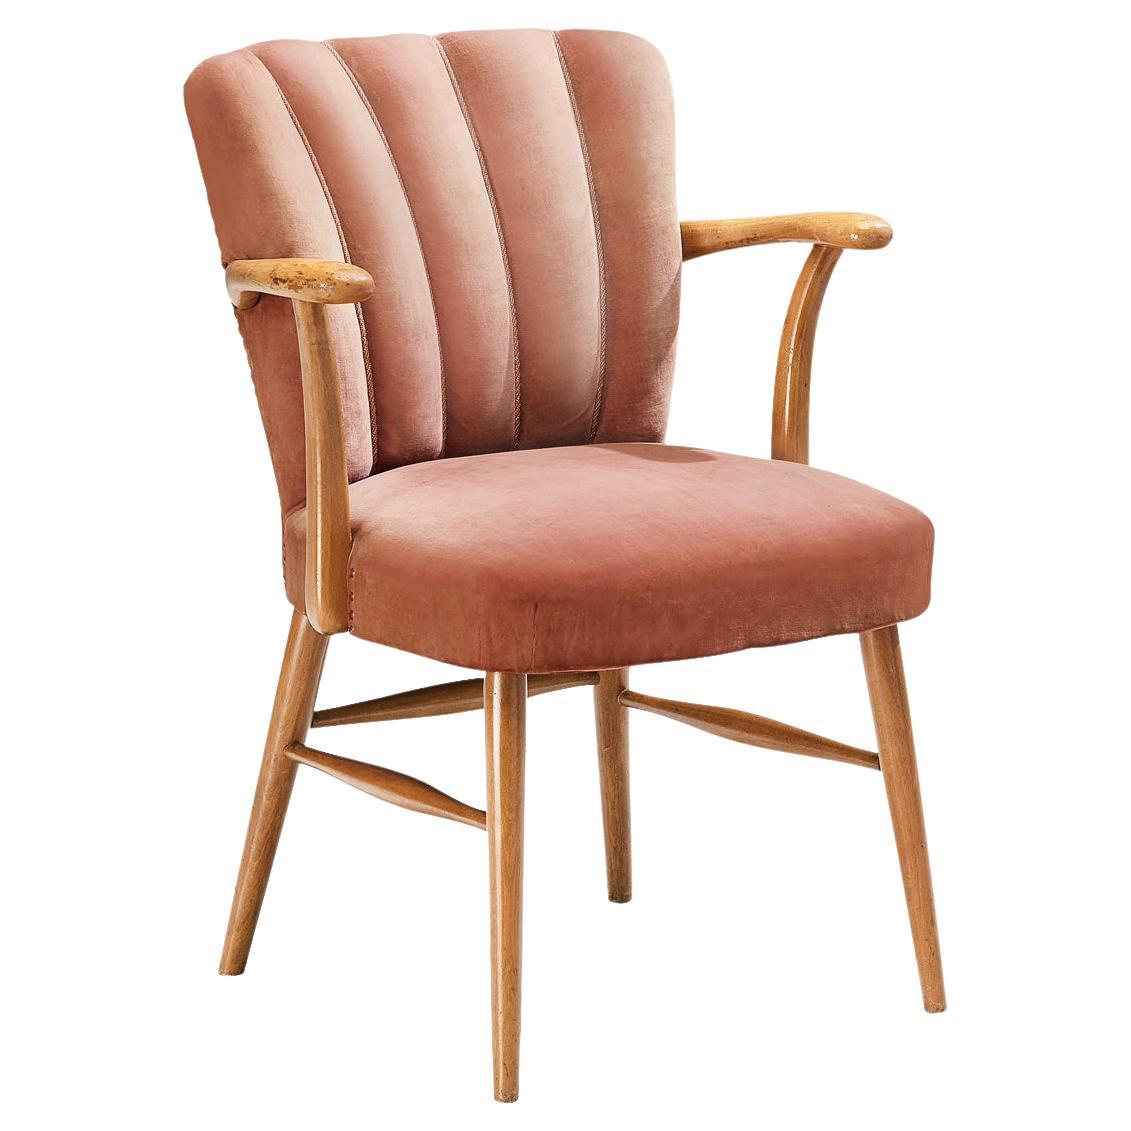 European Armchair in Soft Pink Velvet Upholstery and Wood  For Sale